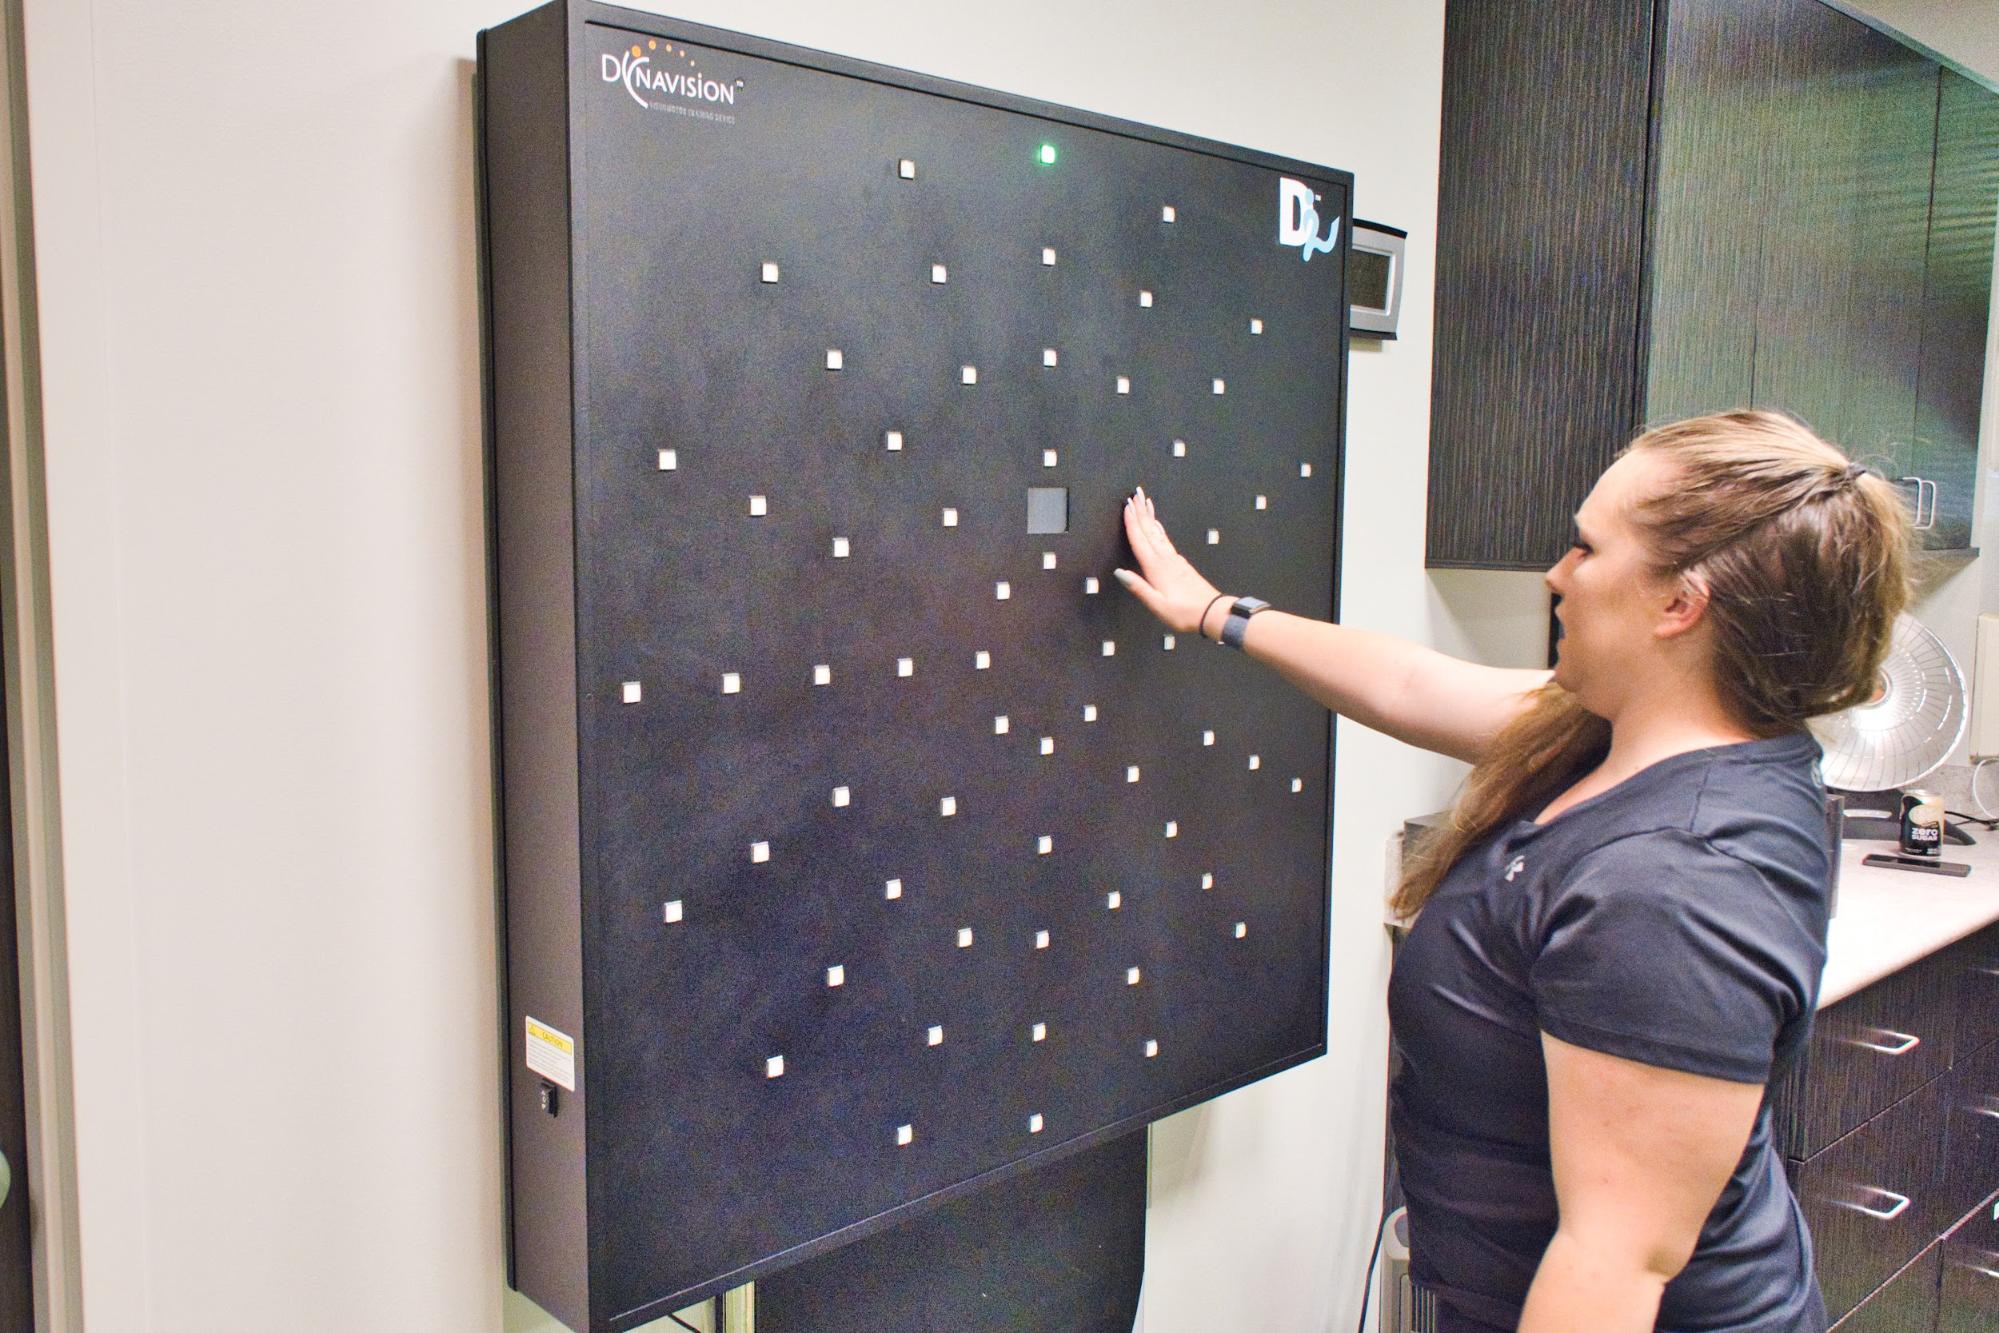 A therapist demonstrates using the Dynavision board, which challenges patients’ reaction times.